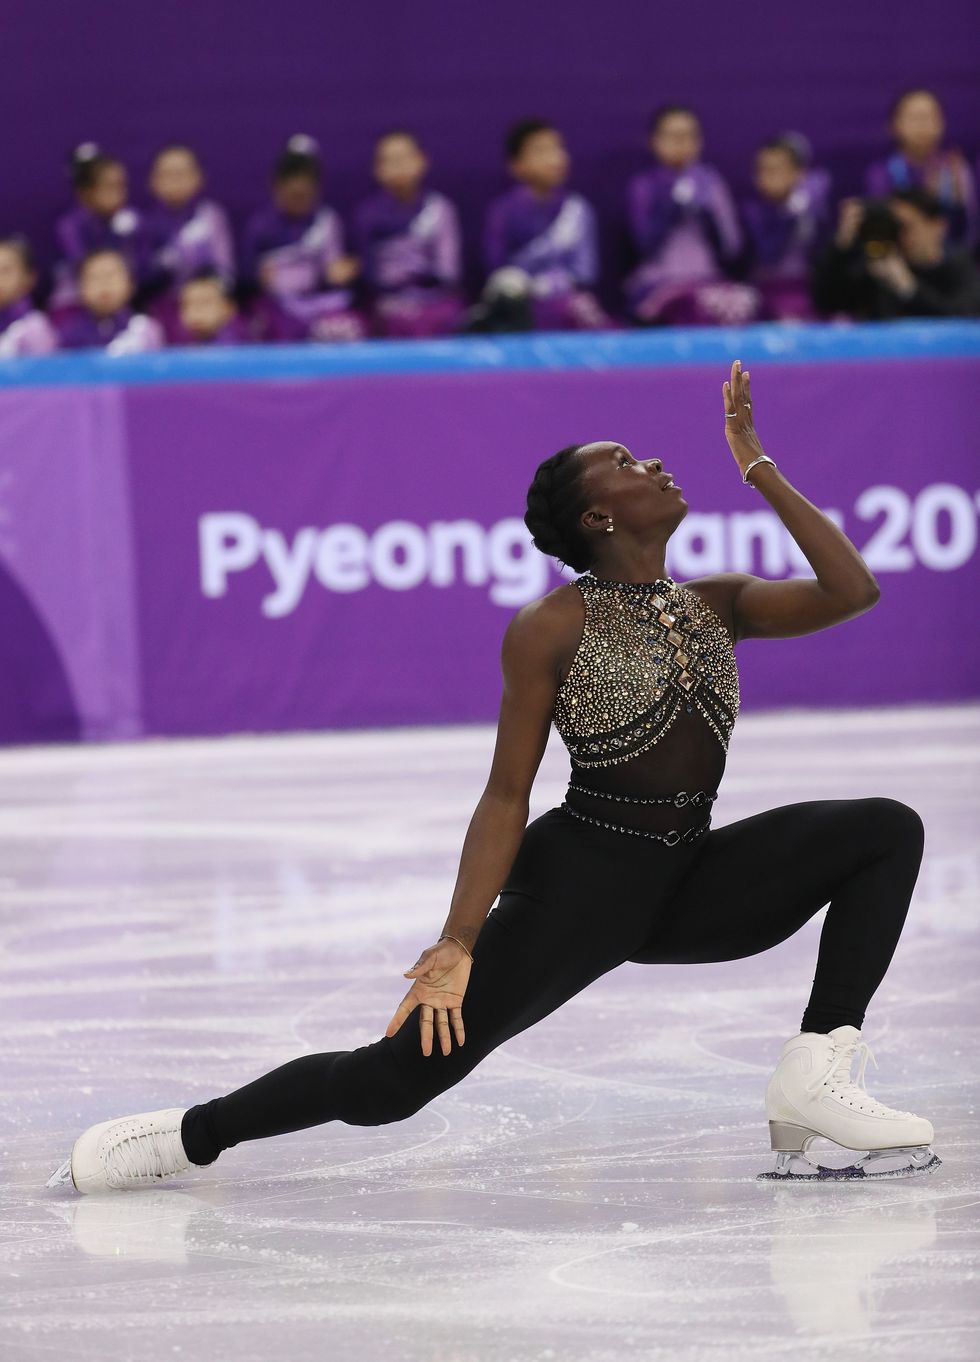 Ice skate, Human leg, Sportswear, Performing arts, Purple, Competition event, Dancer, Knee, Thigh, Field house, 